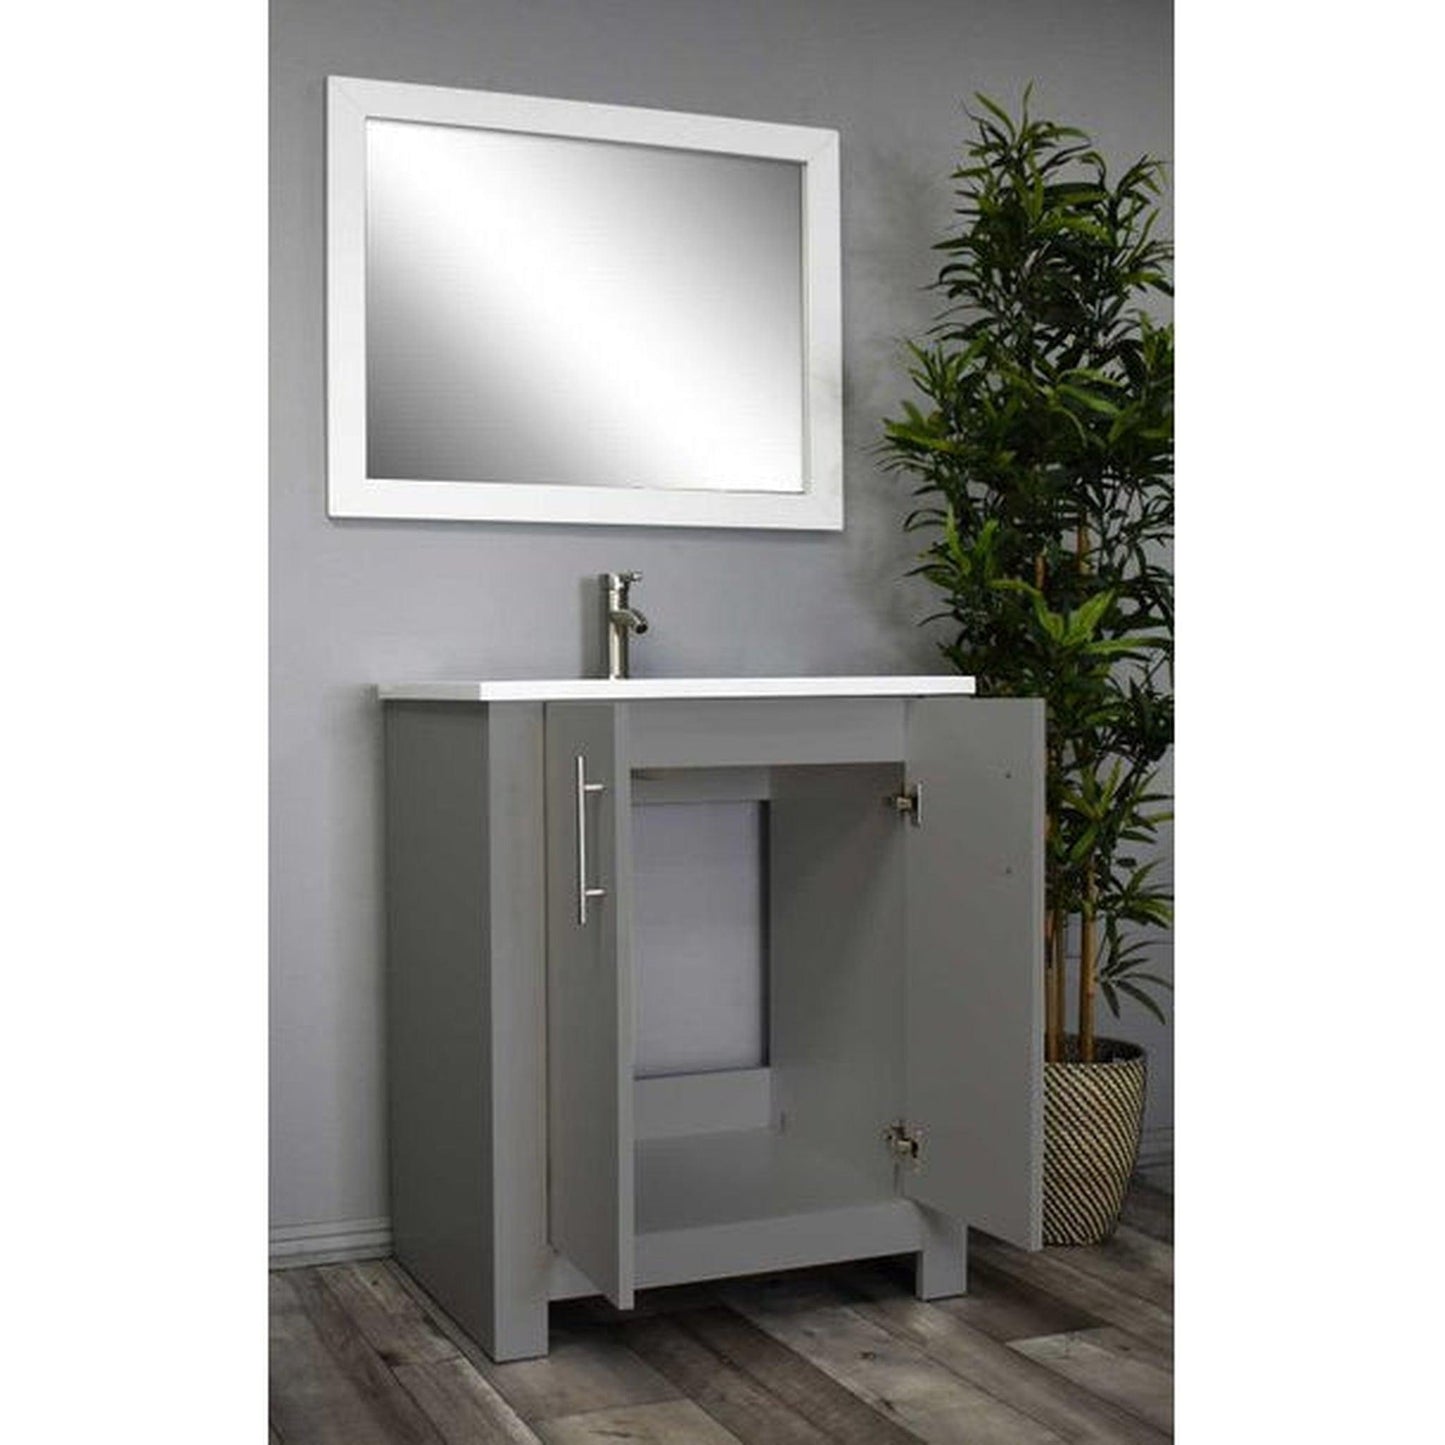 Volpa USA Austin 30" x 20" Gray Modern Freestanding Bathroom Vanity With Acrylic Top, Integrated Acrylic Sink And Brushed Nickel Handles